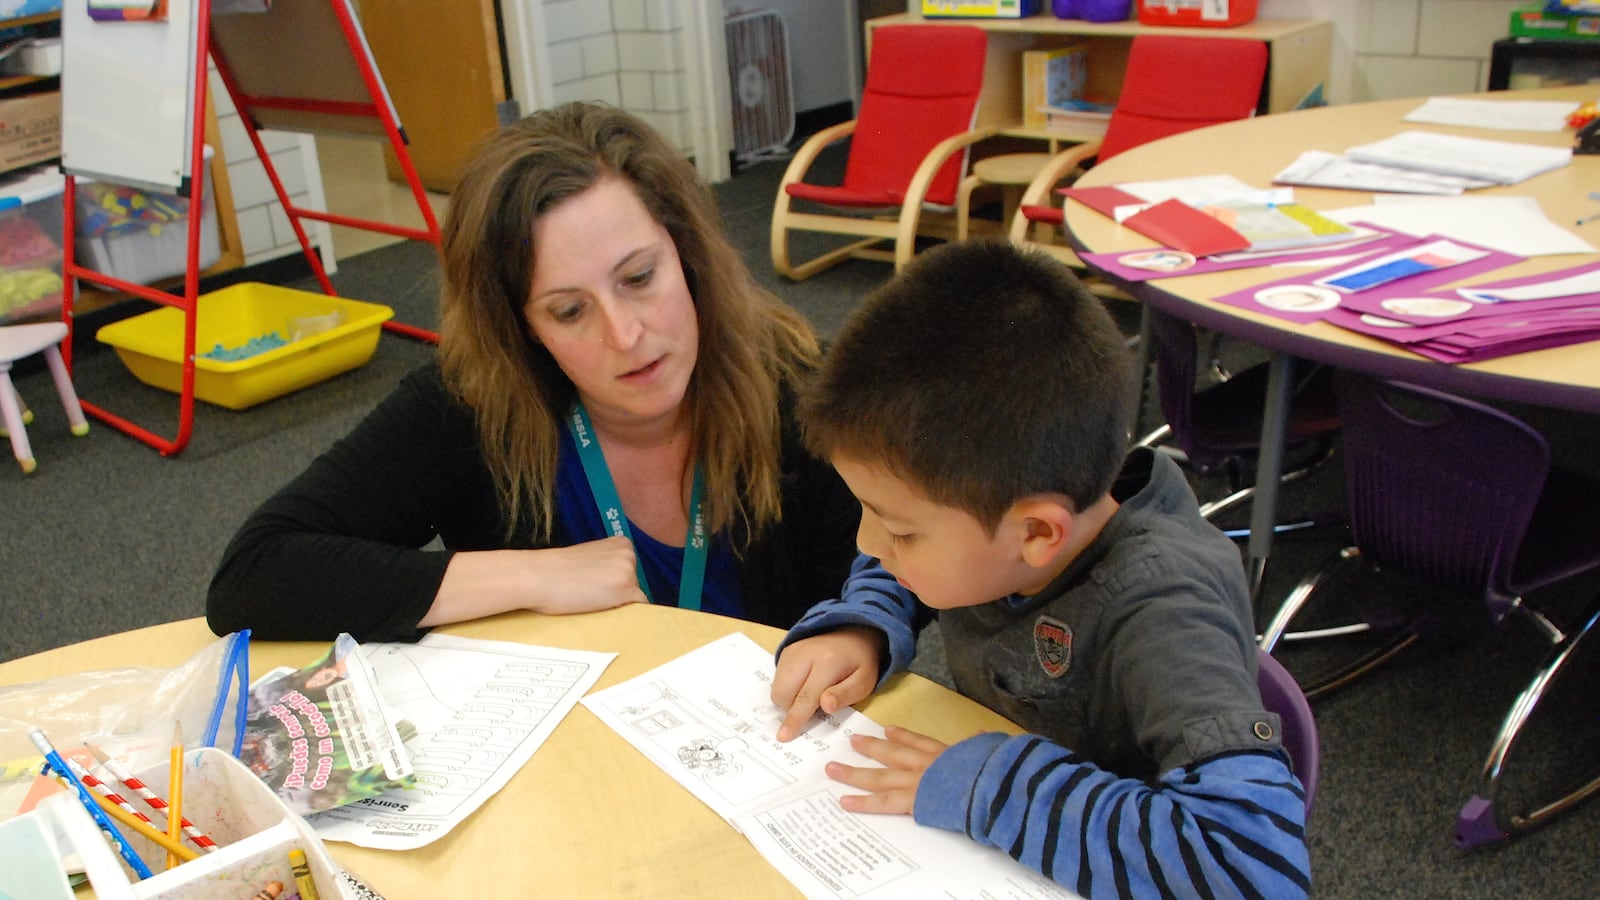 Kim Ursetta works with a student in her classroom at Denver's Mathematics and Science Leadership Academy.